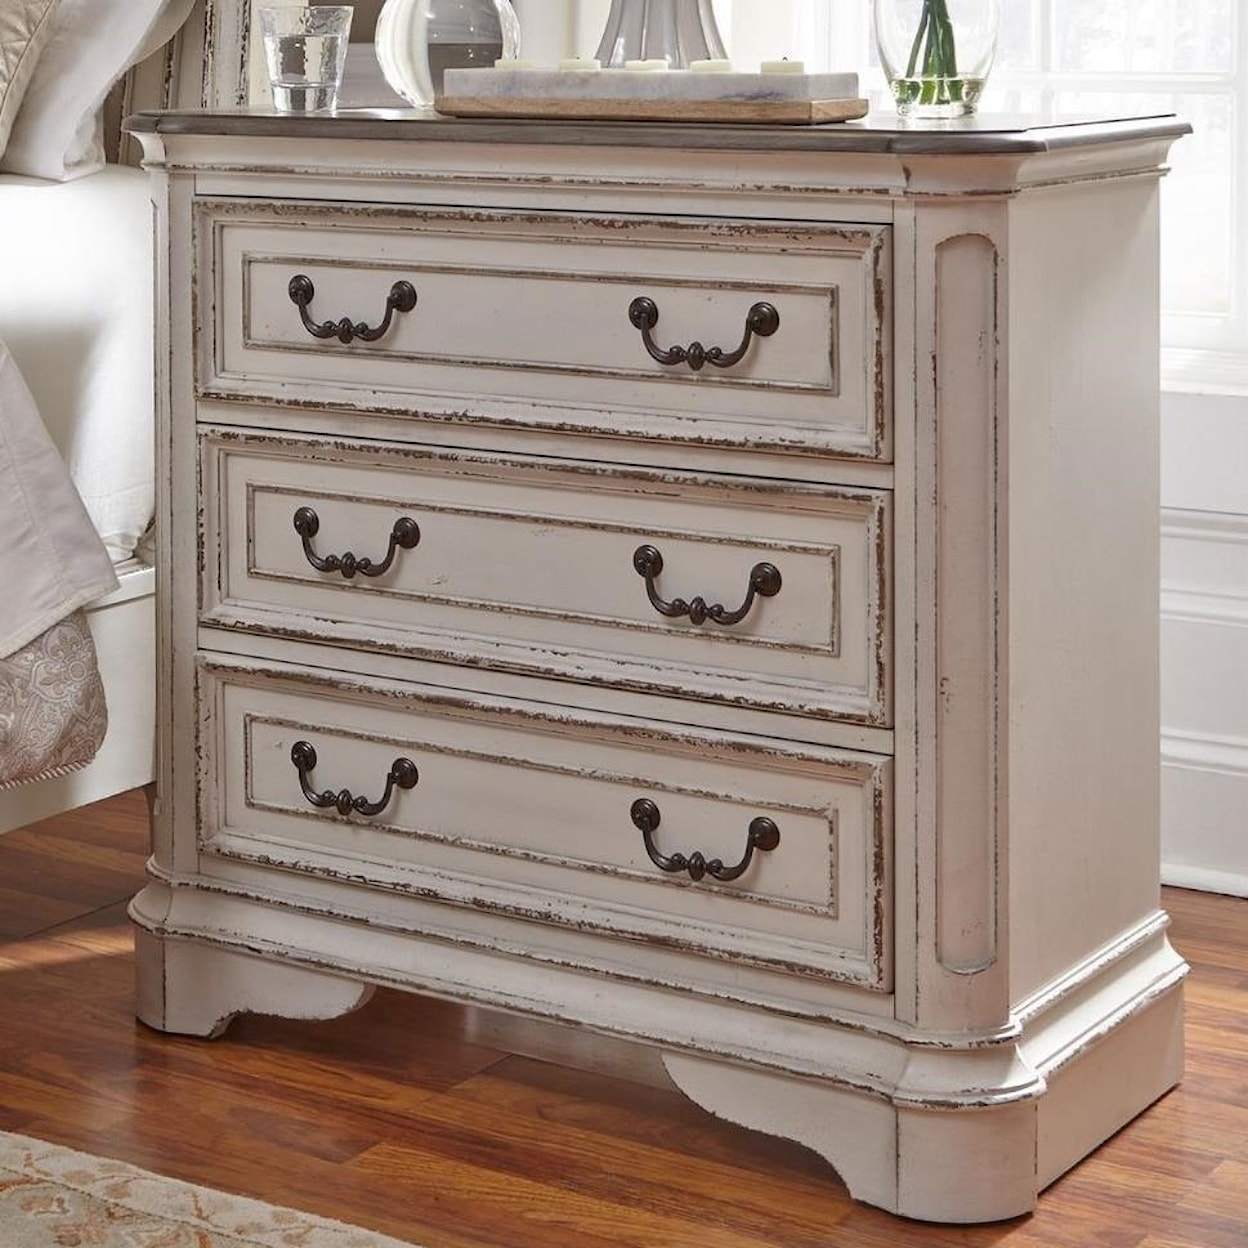 Liberty Furniture Magnolia Manor 3 Drawer Bedside Chest